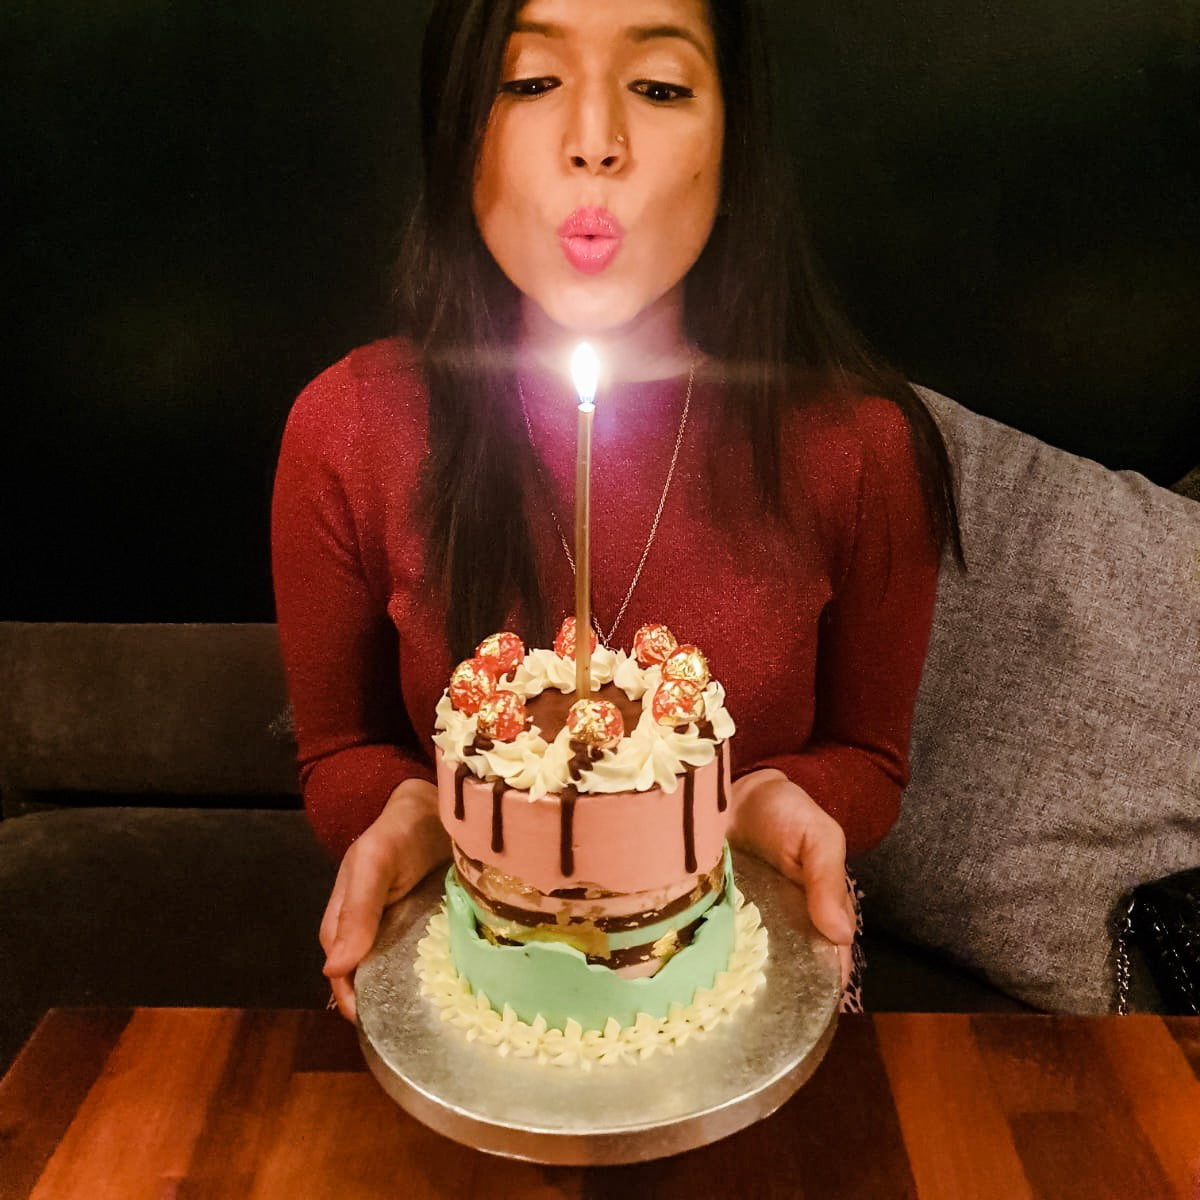 Why We Blow Out Candles On A Birthday Cake - Mr T's Bakery